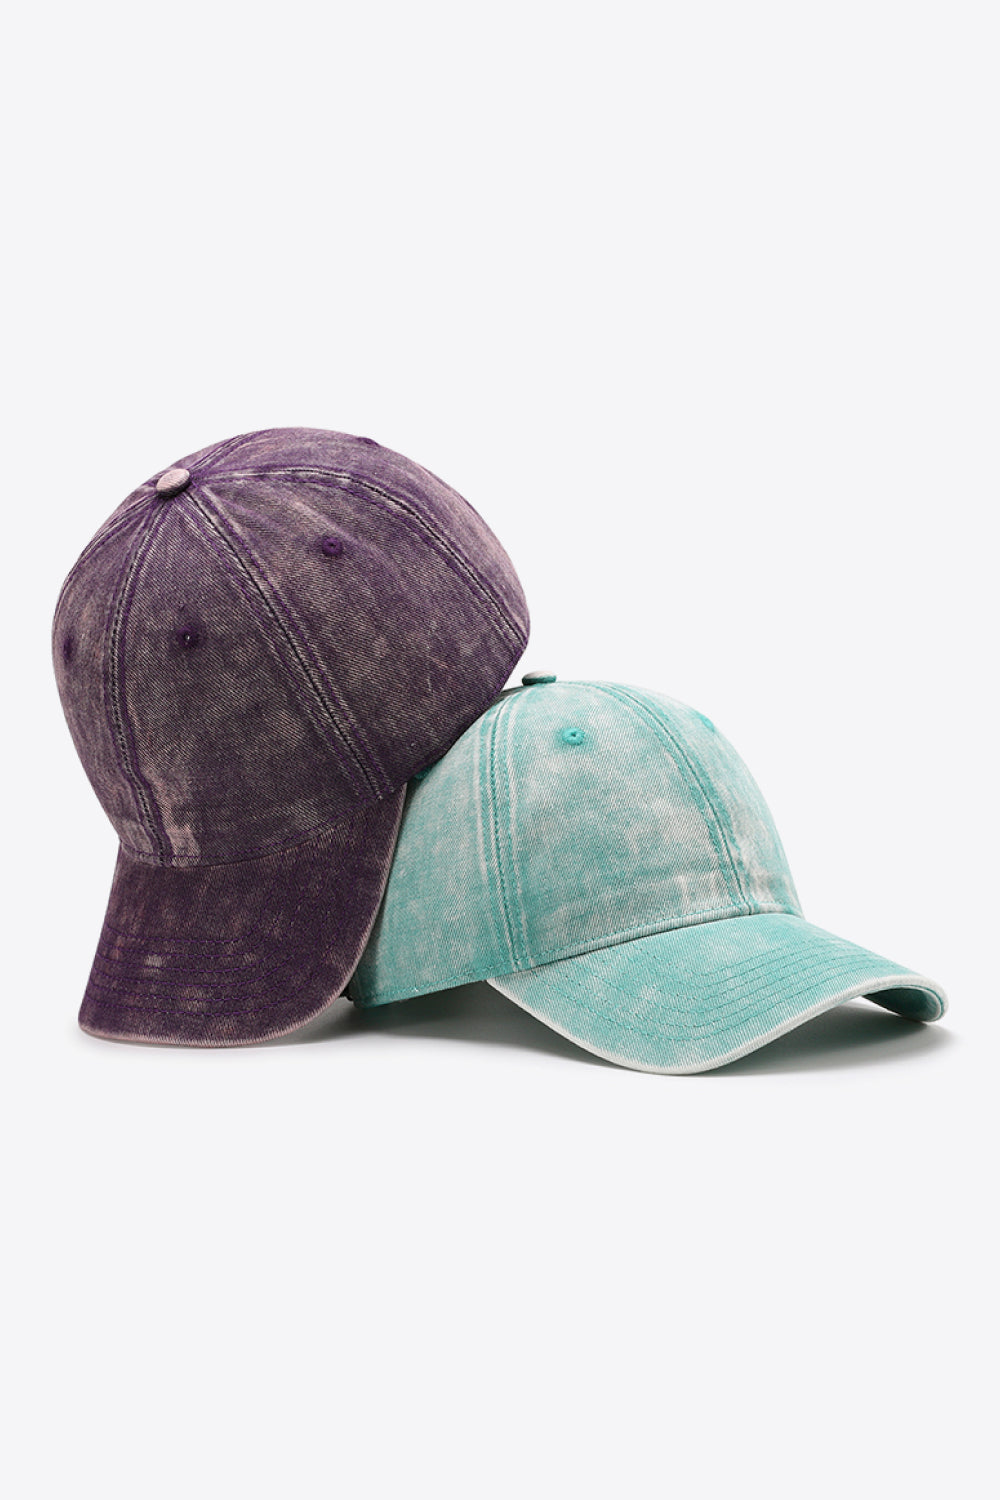 Villa Blvd Washed Baseball Hat ☛ Multiple Colors Available ☚